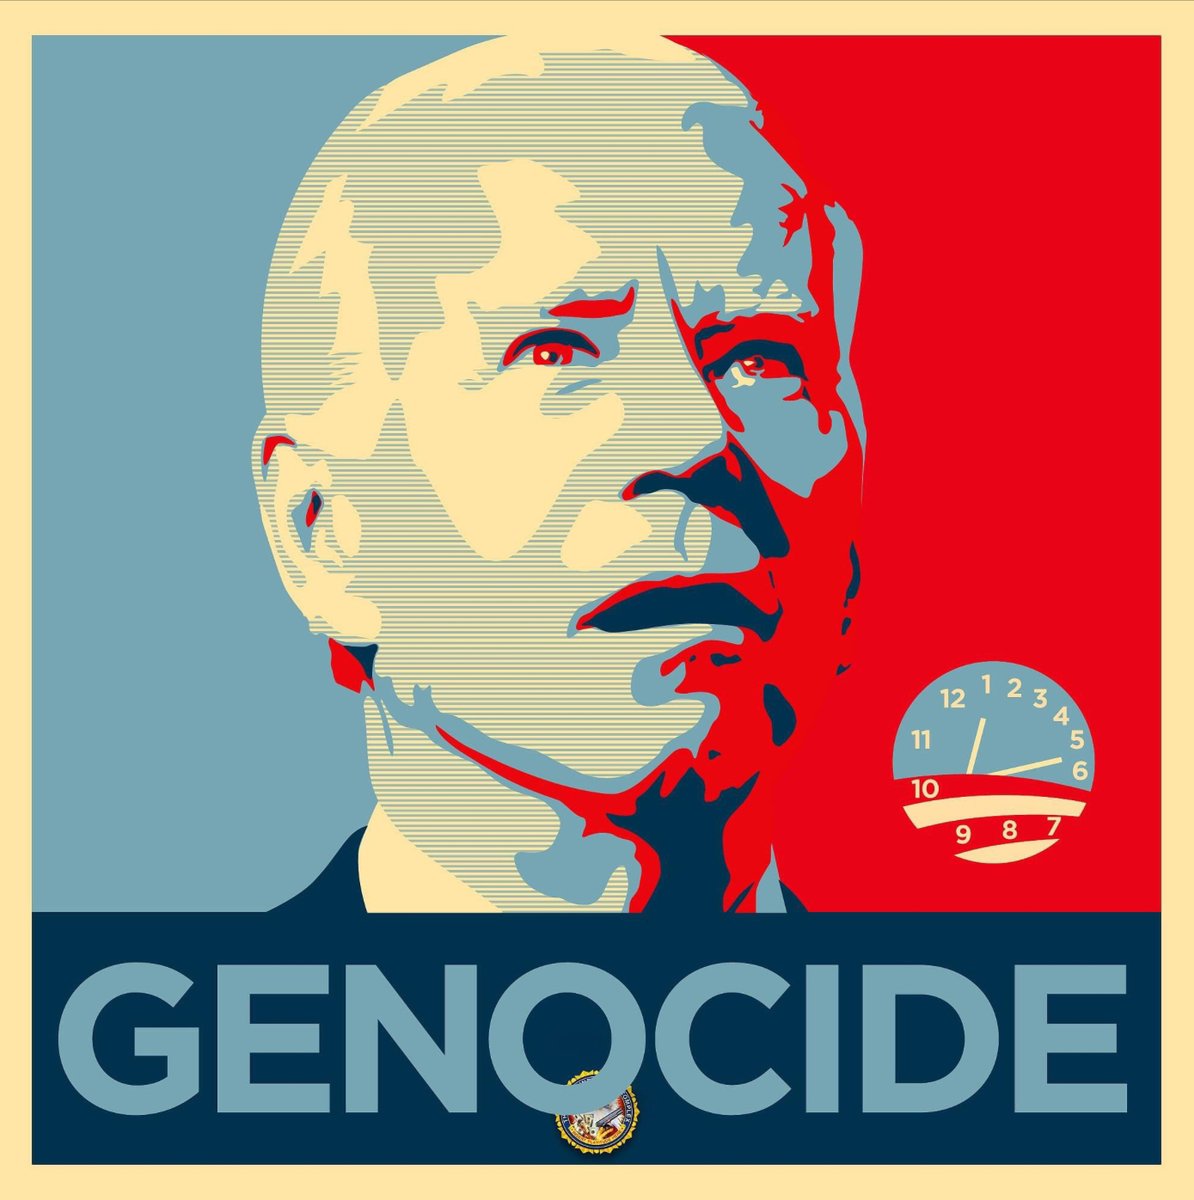 There will never be a reason or excuse to vote for a #warcriminal like #GenocideJoe #Biden Not even a 2nd Trump term. #CeasefireNOW #StopTheGenocide #FreePalestine #StopArmingIsrael #DefundThePentagon #NobodyForPresident 🇵🇸🕊️🇵🇸🕊️🇵🇸🕊️